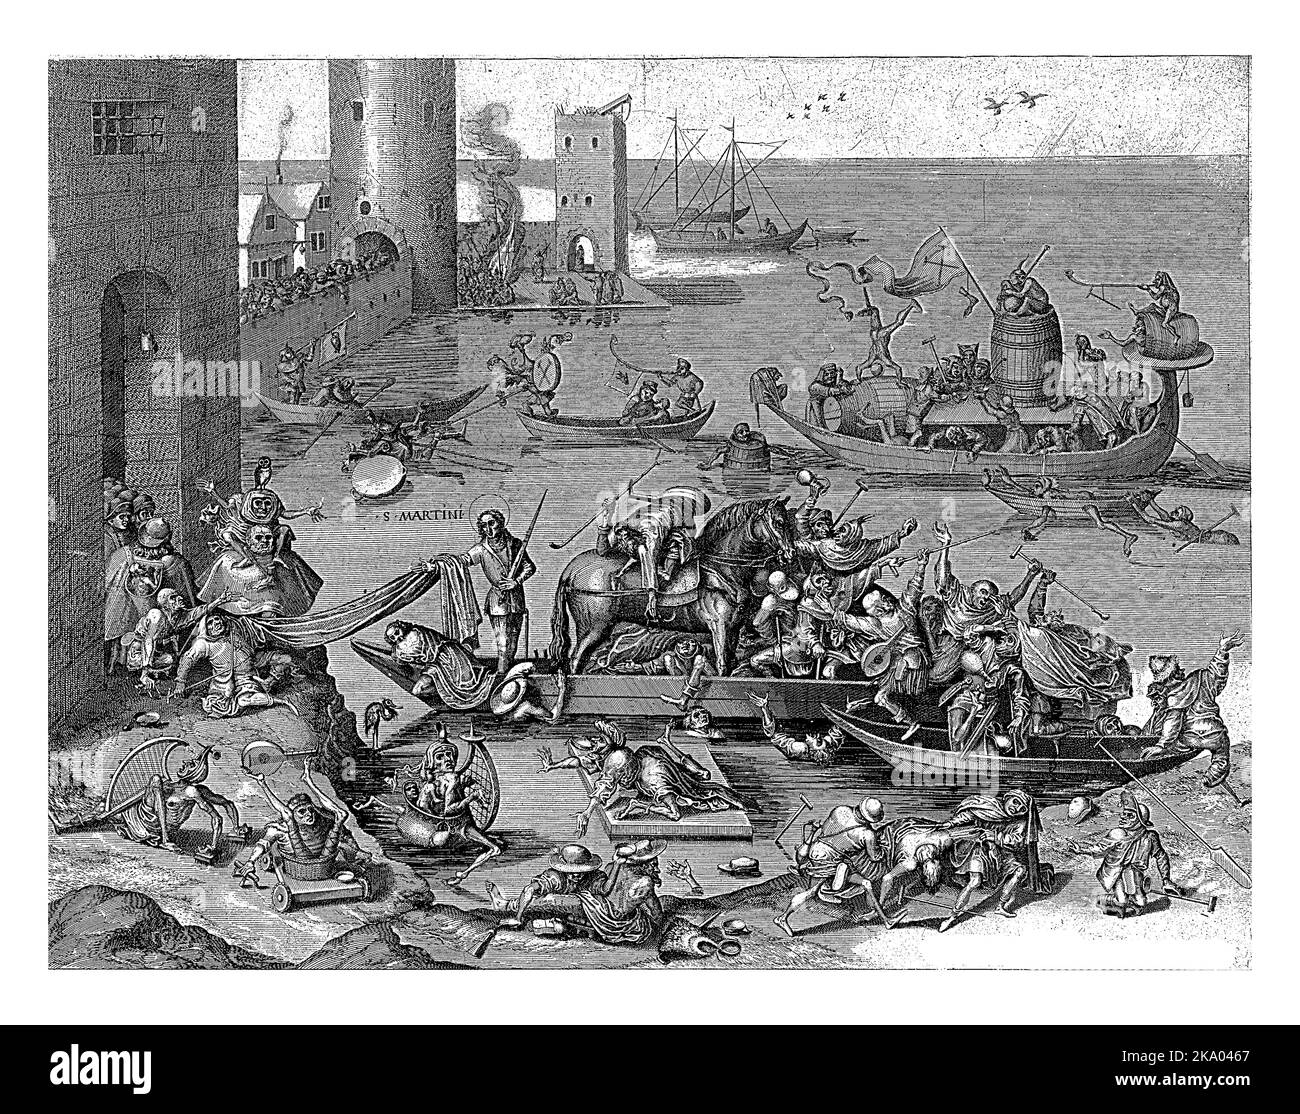 H. Martinus stands behind his horse on a ship of fools. Over his arm hangs his cloak, which is held ashore by beggars. Stock Photo